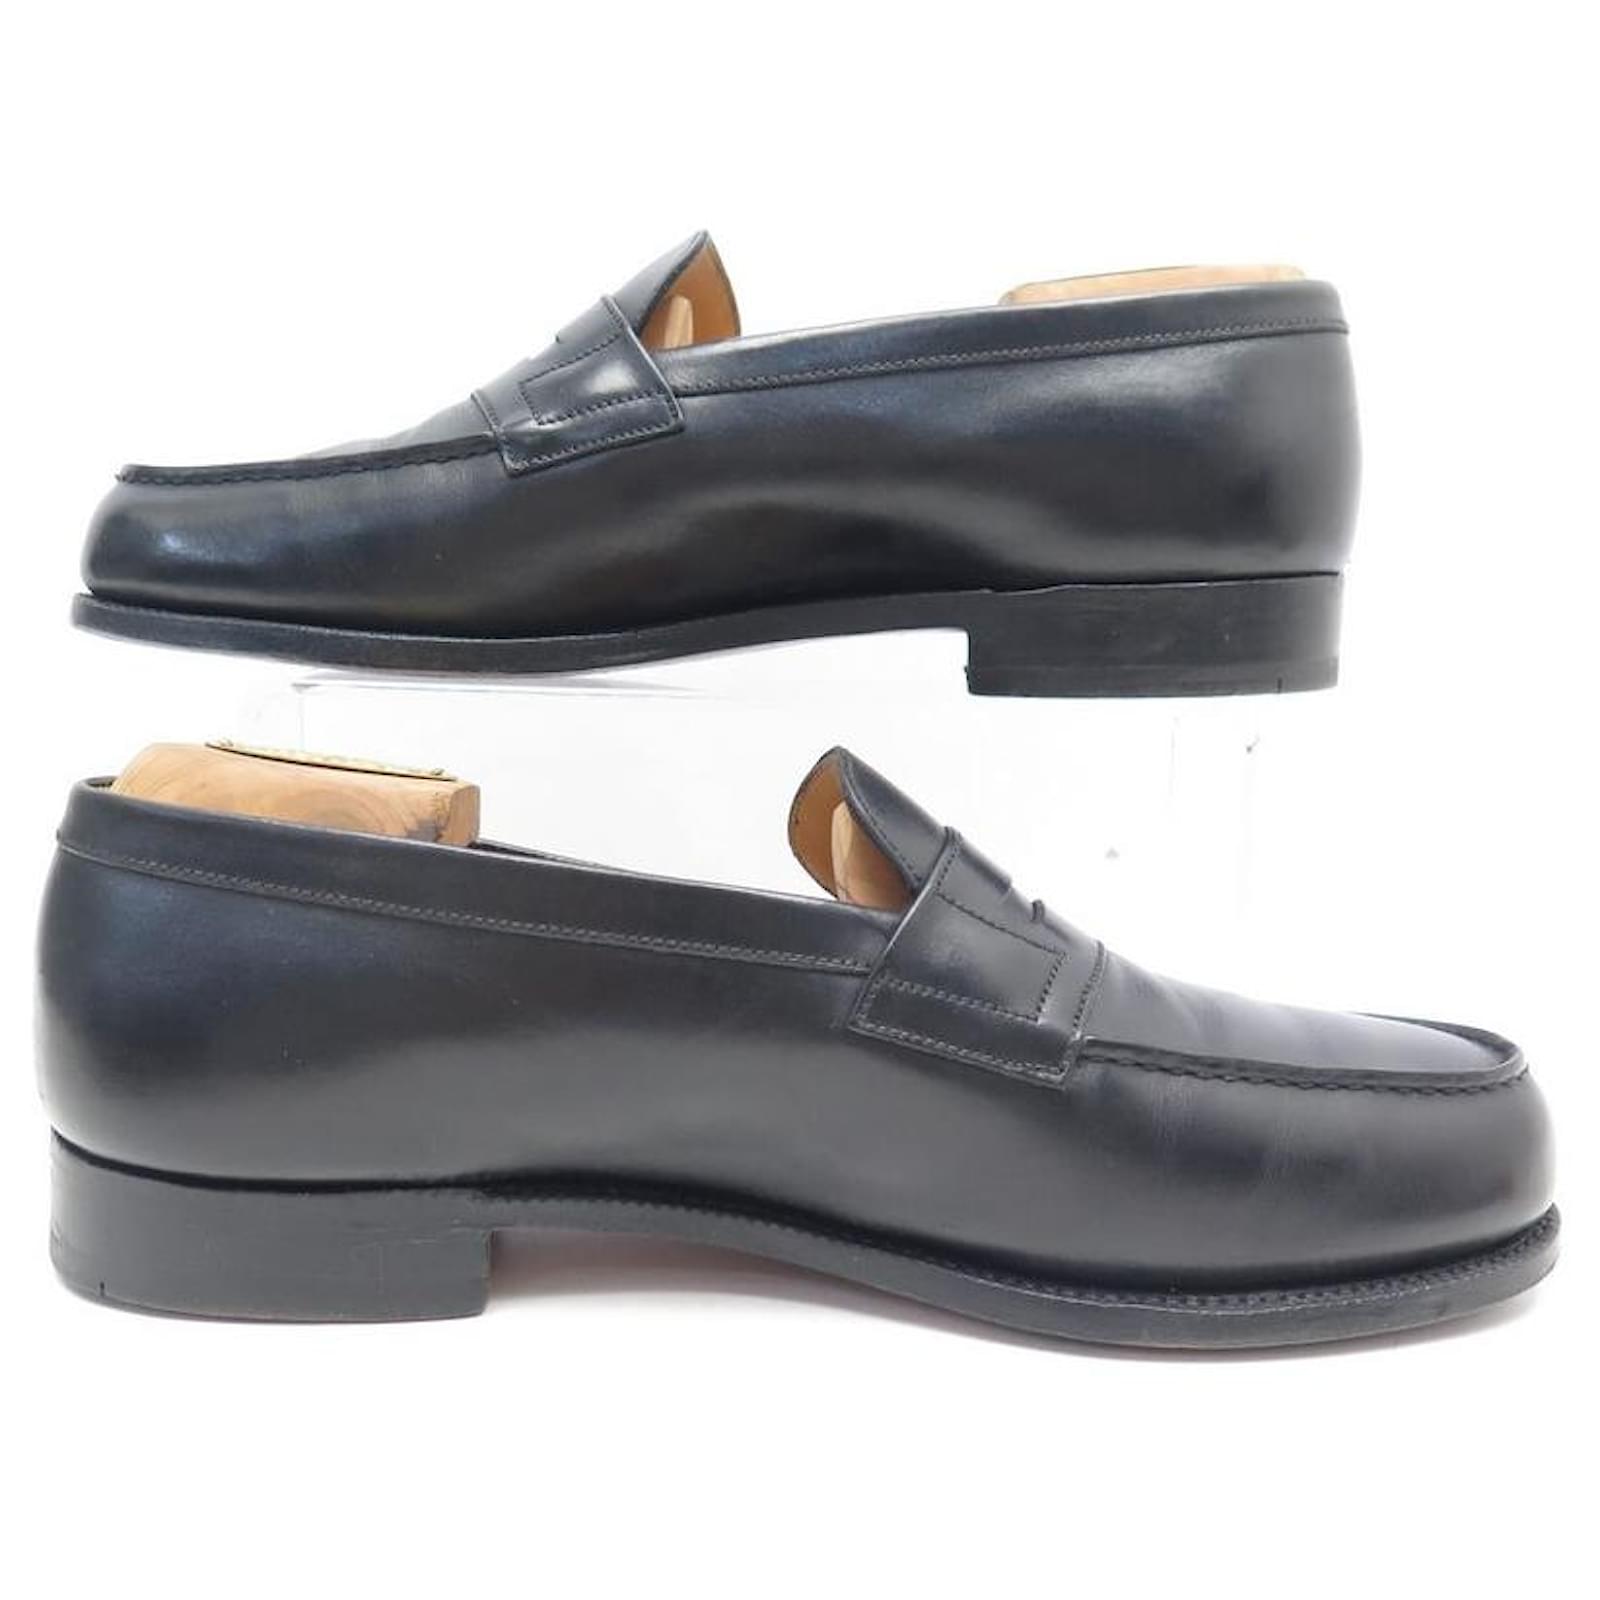 JM WESTON SHOES 180 7.5C 41 41.5 FIN BLACK LEATHER MOCCASIN LOAFERS ...